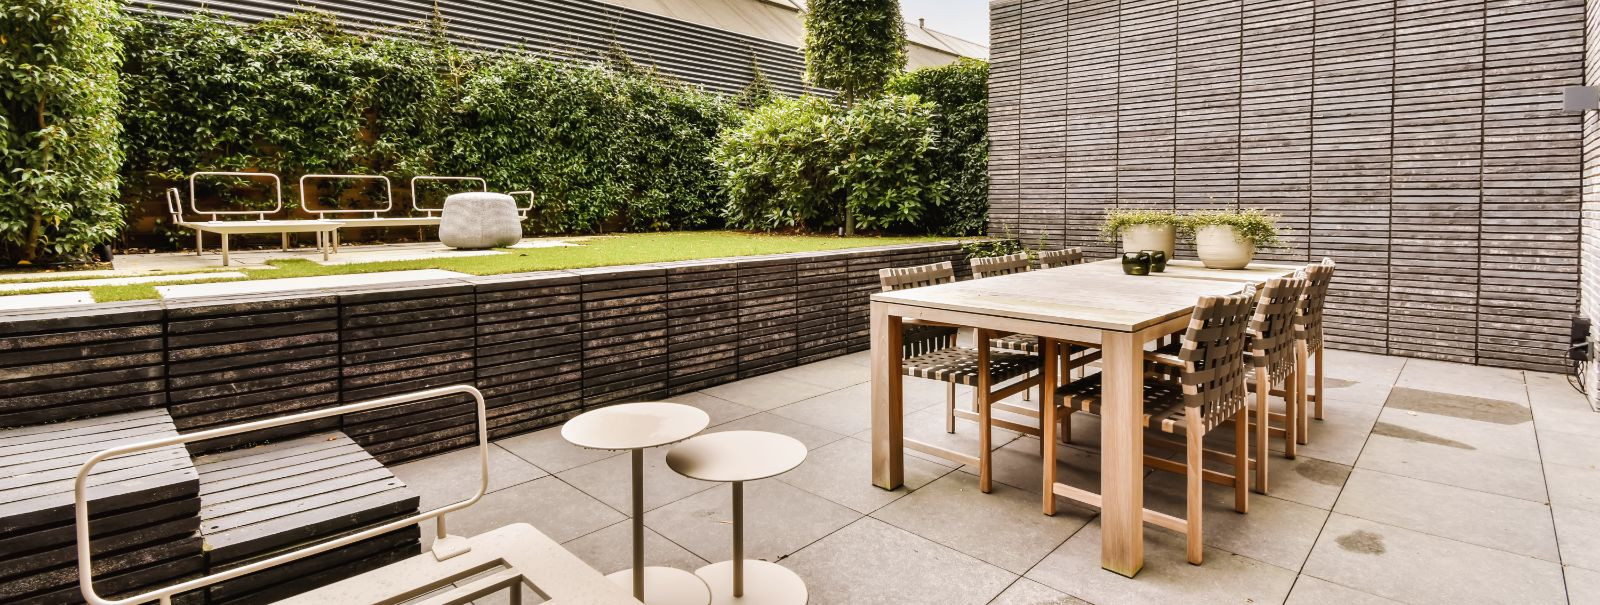 Imagine stepping out into your backyard and being greeted by a beautifully designed terrace that invites relaxation and entertainment. A custom terrace is more 